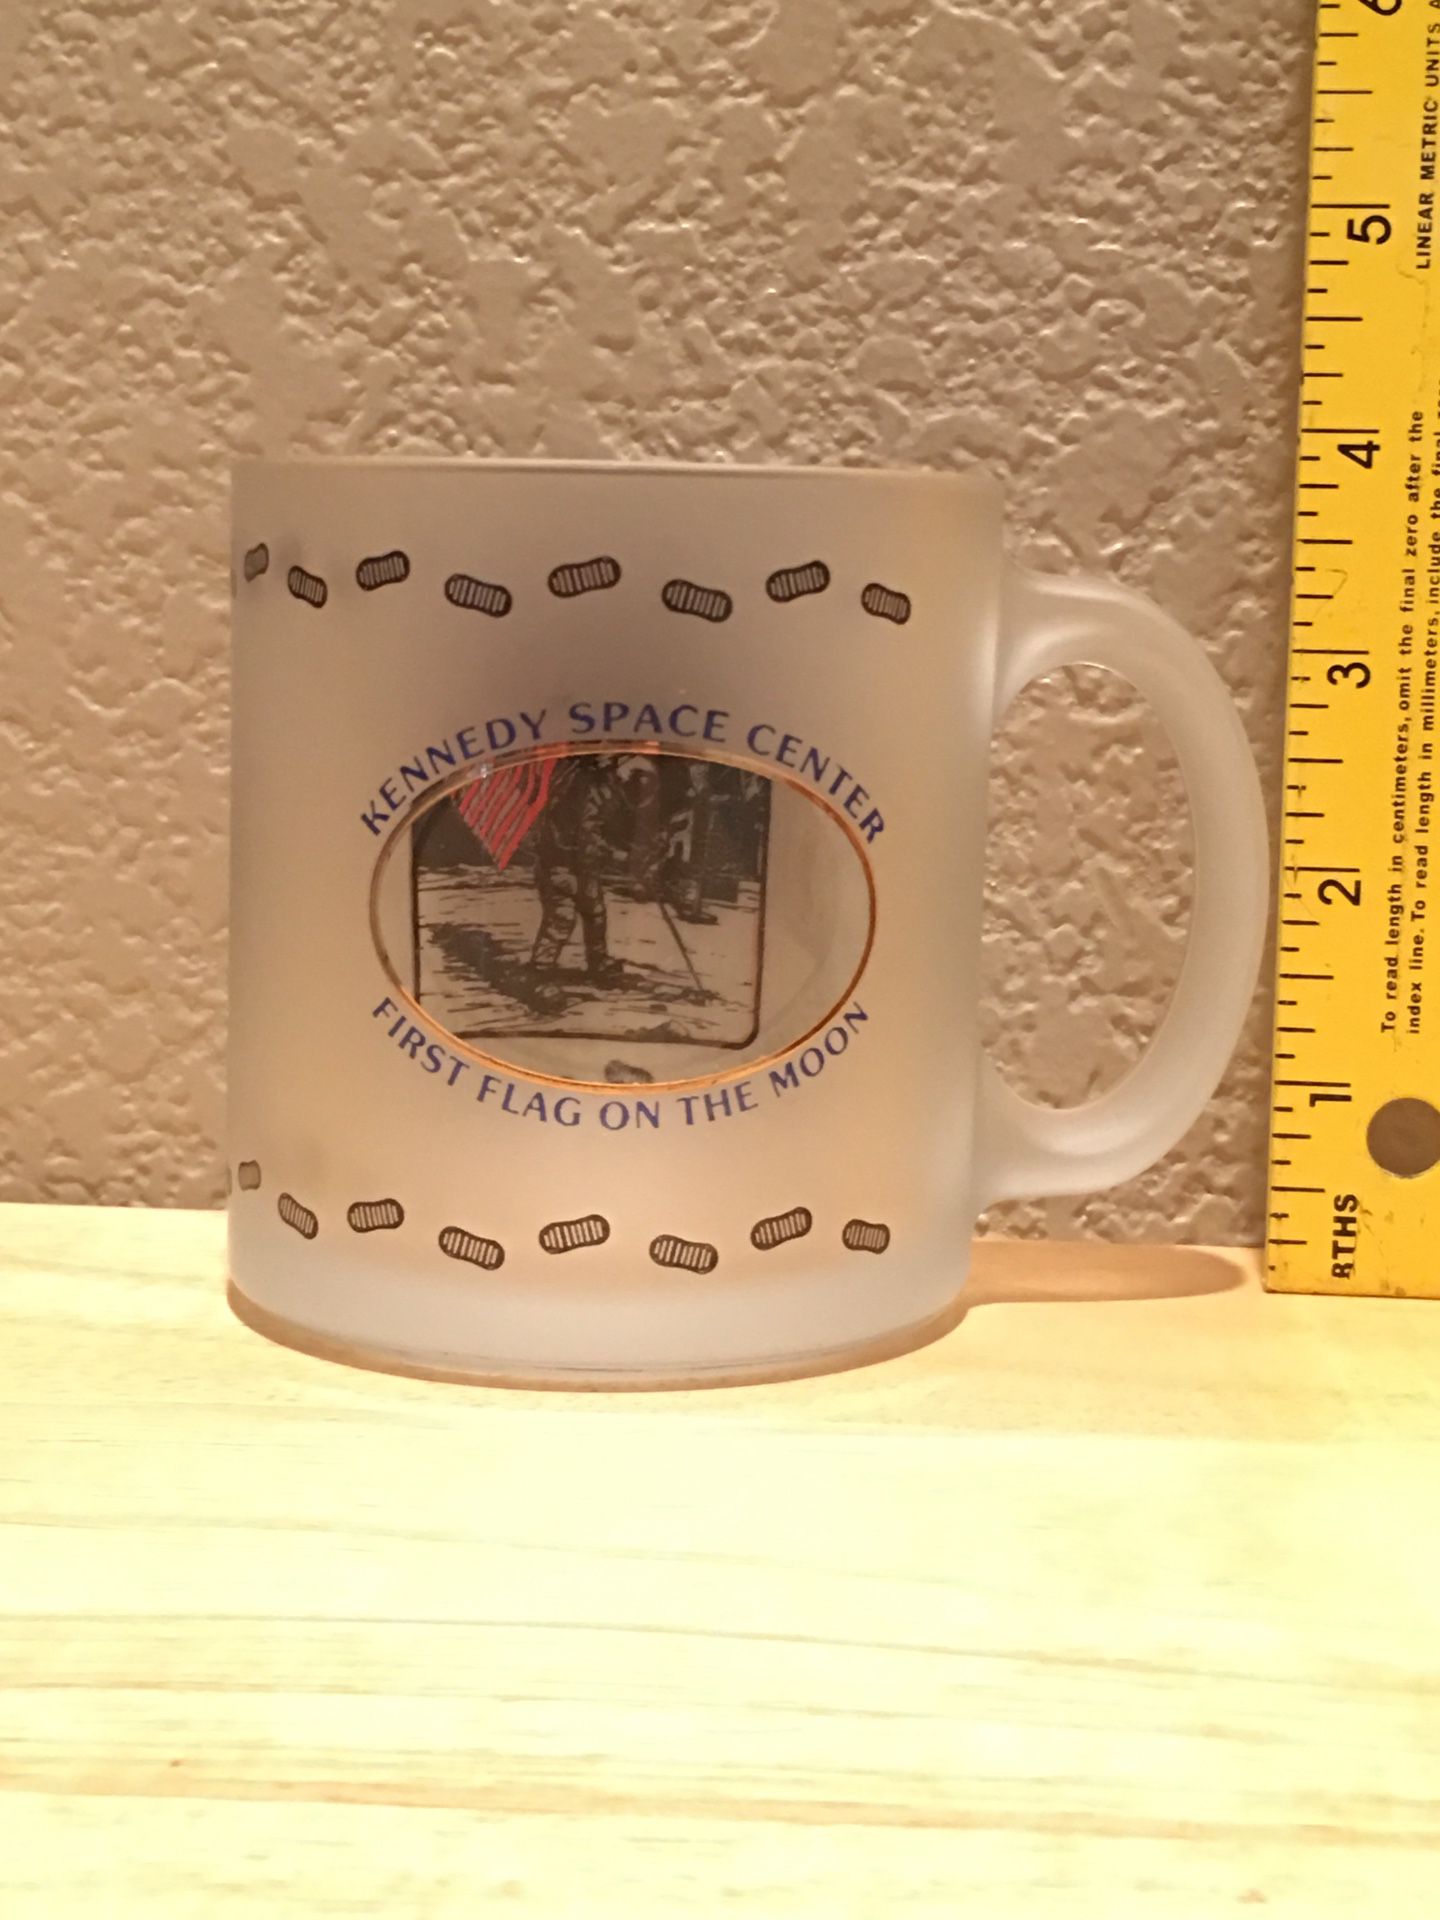 Awesome Kennedy Space Center Collectible Mug Glass Frosted See Through Window